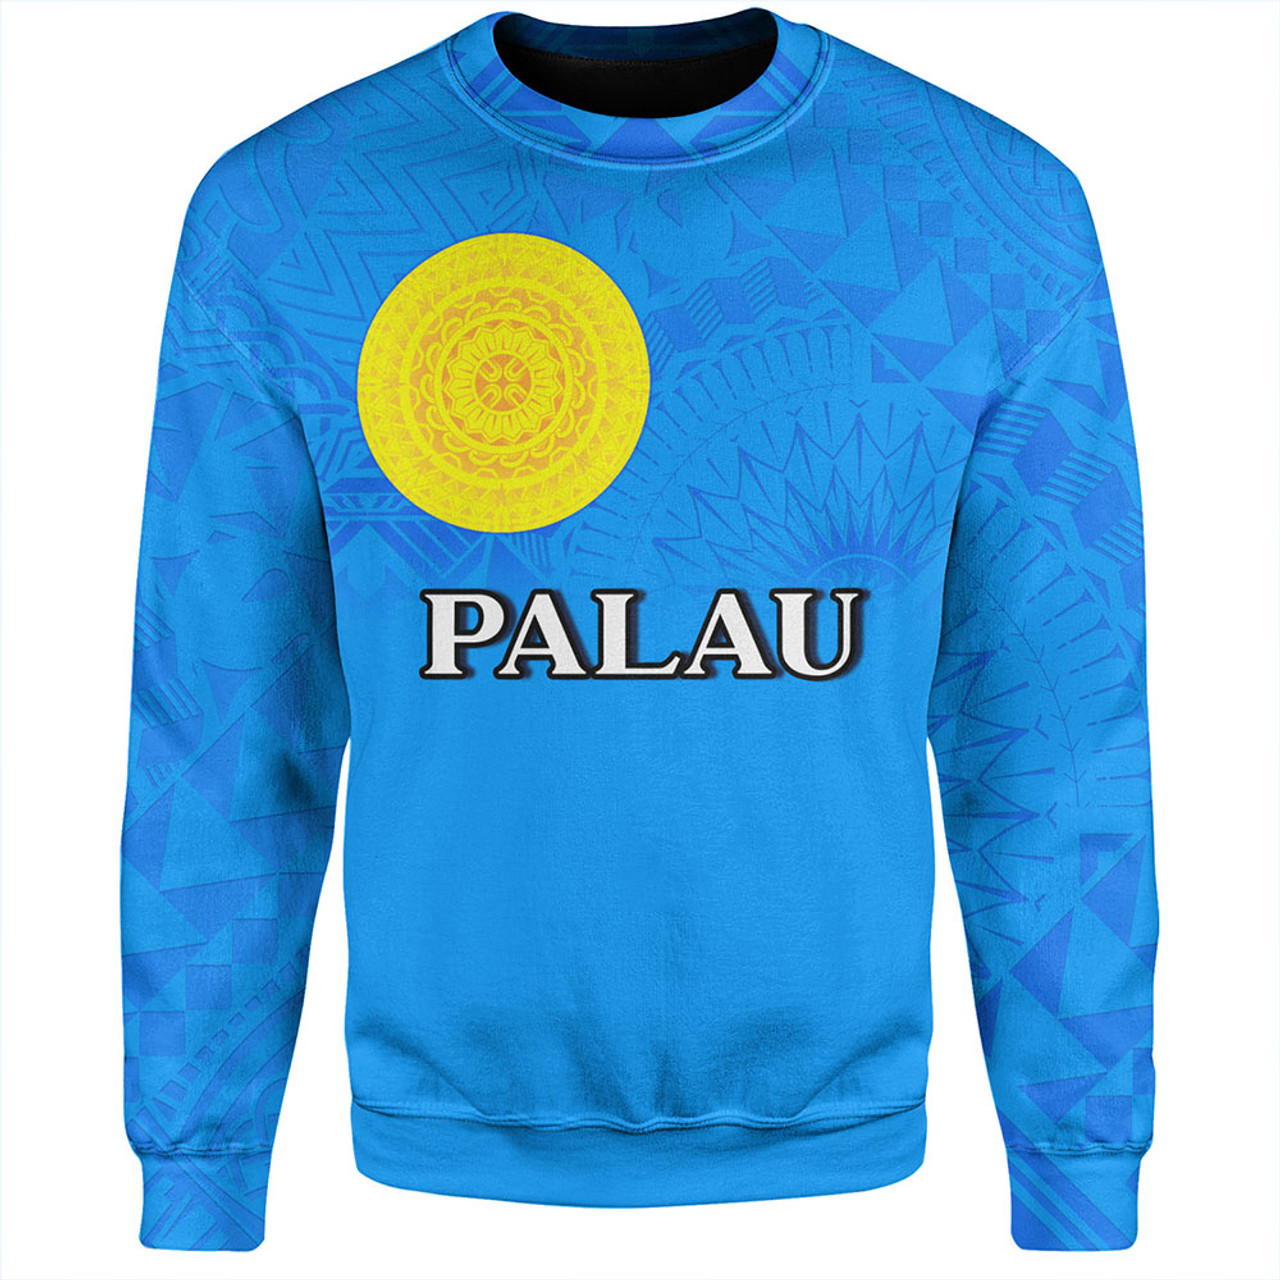 Palau Sweatshirt Flag Color With Traditional Patterns